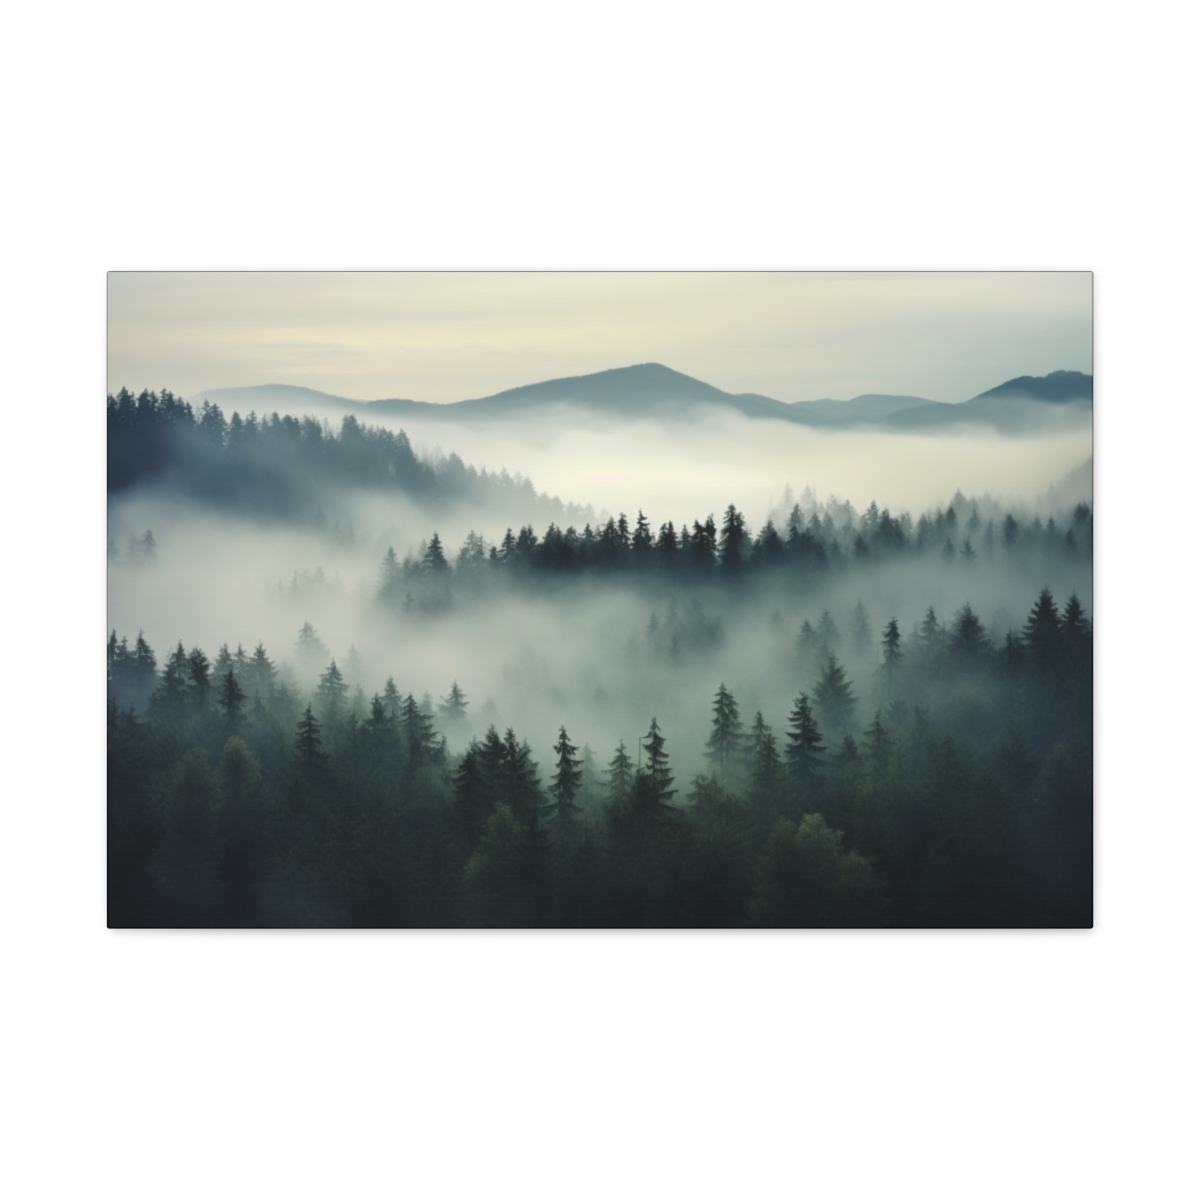 Forest Art Canvas Print: Palette of The Forest